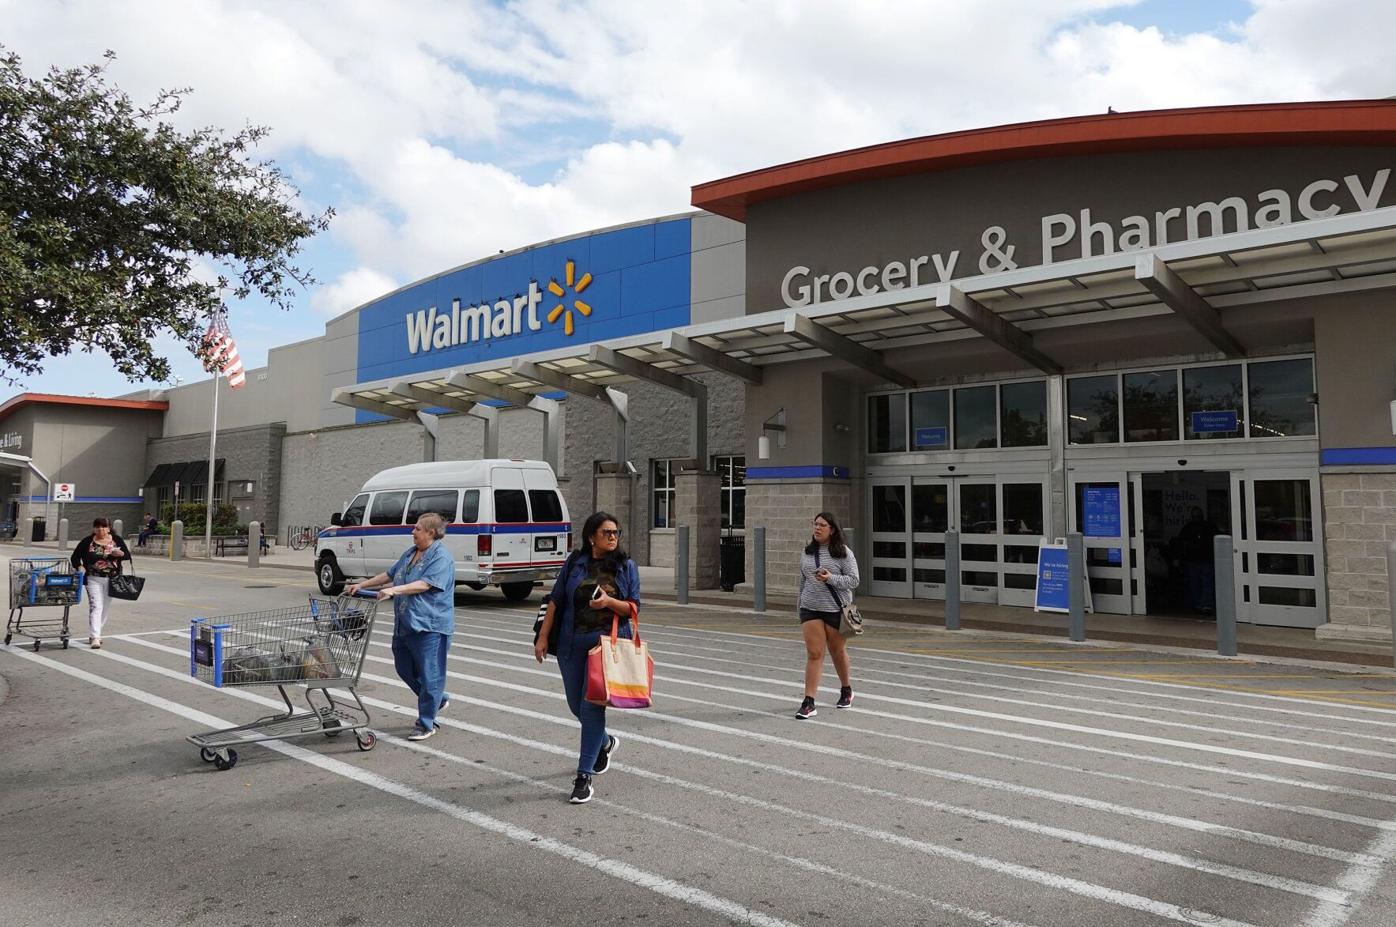 Big Stores Cut Prices: How Walmart and Target's Latest Discounts Could Ease Your Budget